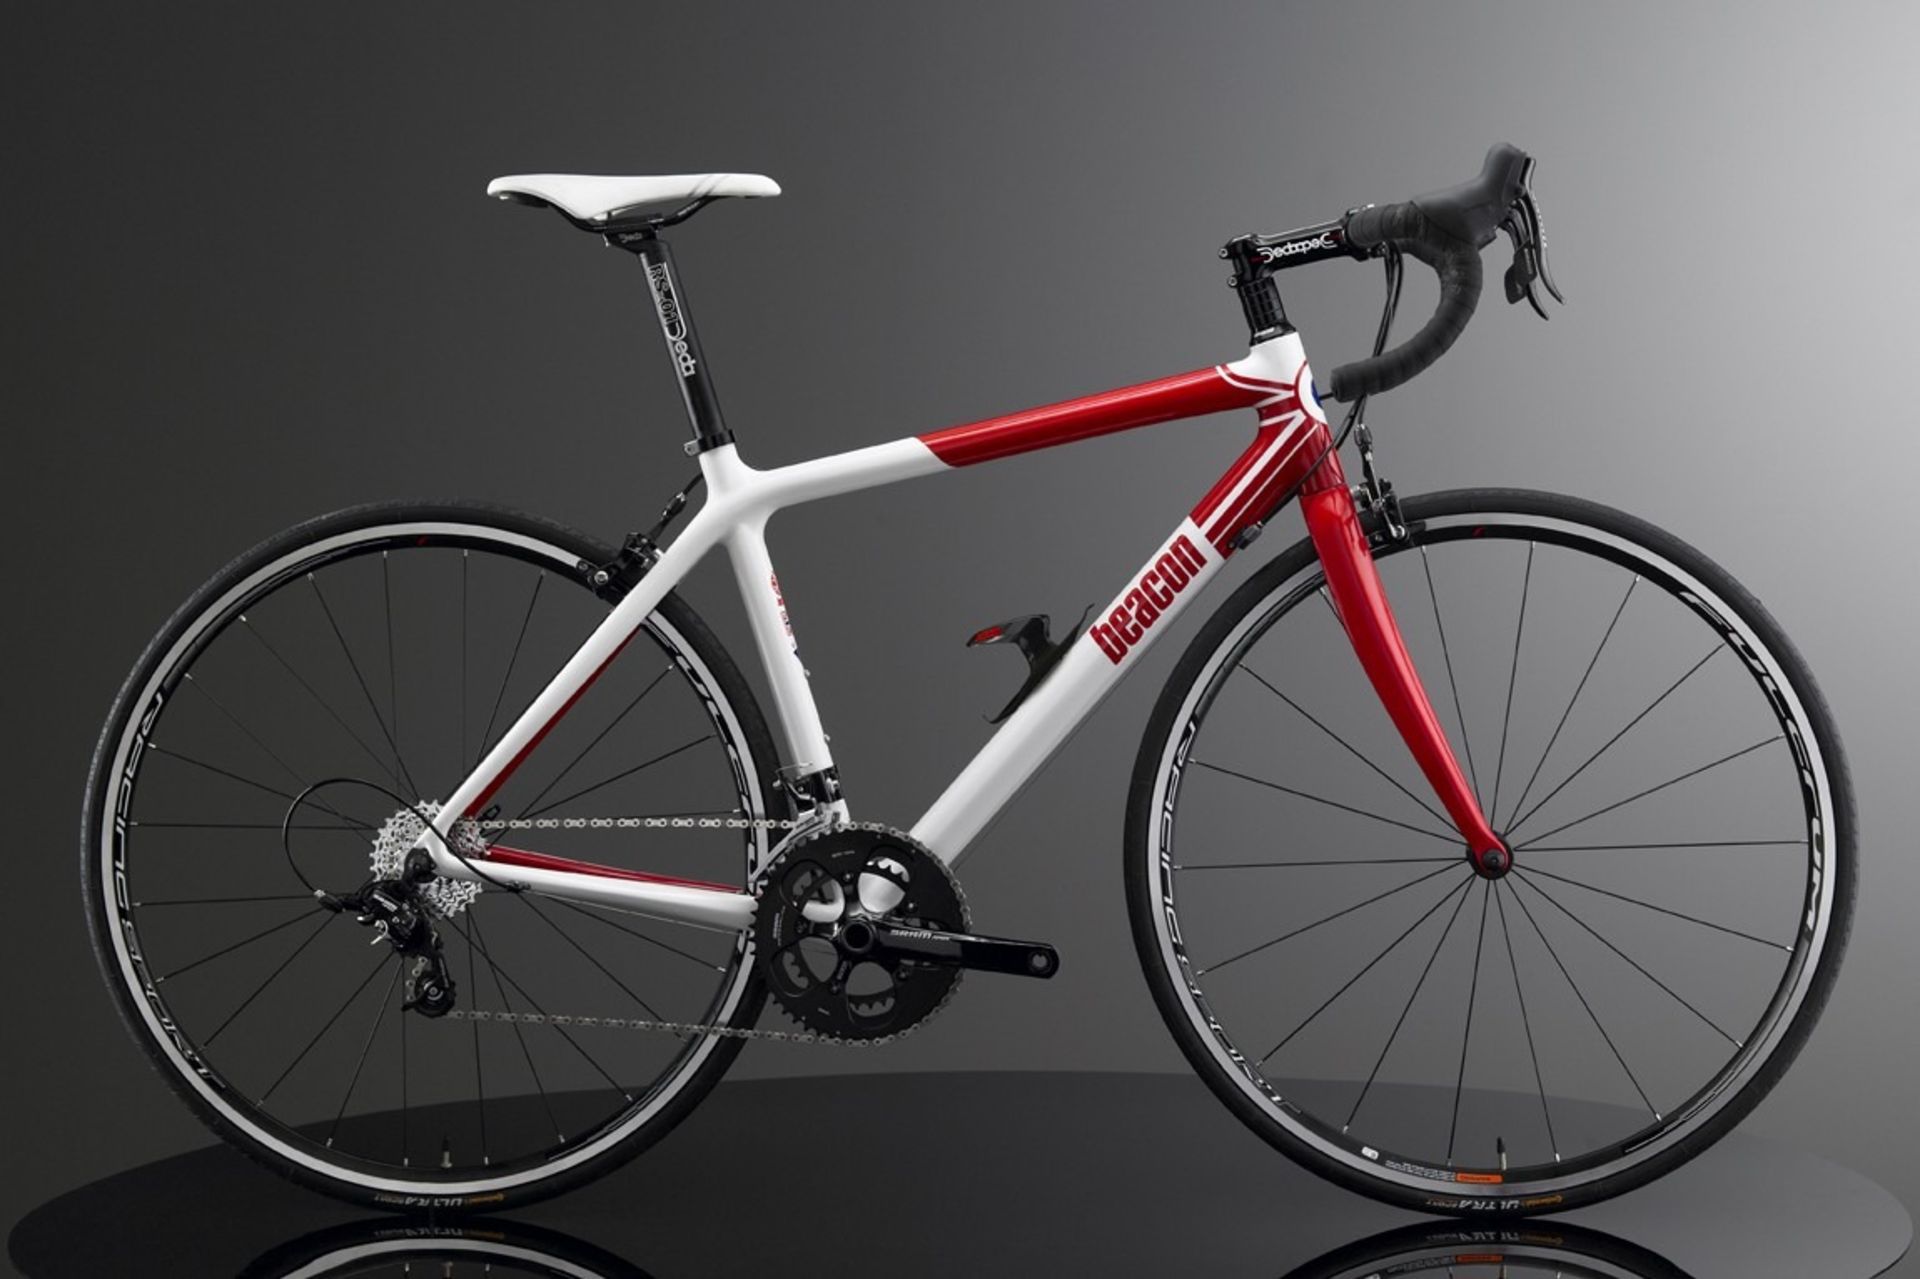 1 x Beacon Model BF-60, Size 440, Carbon Fibre Bike Frame in White & Red . - Image 2 of 3